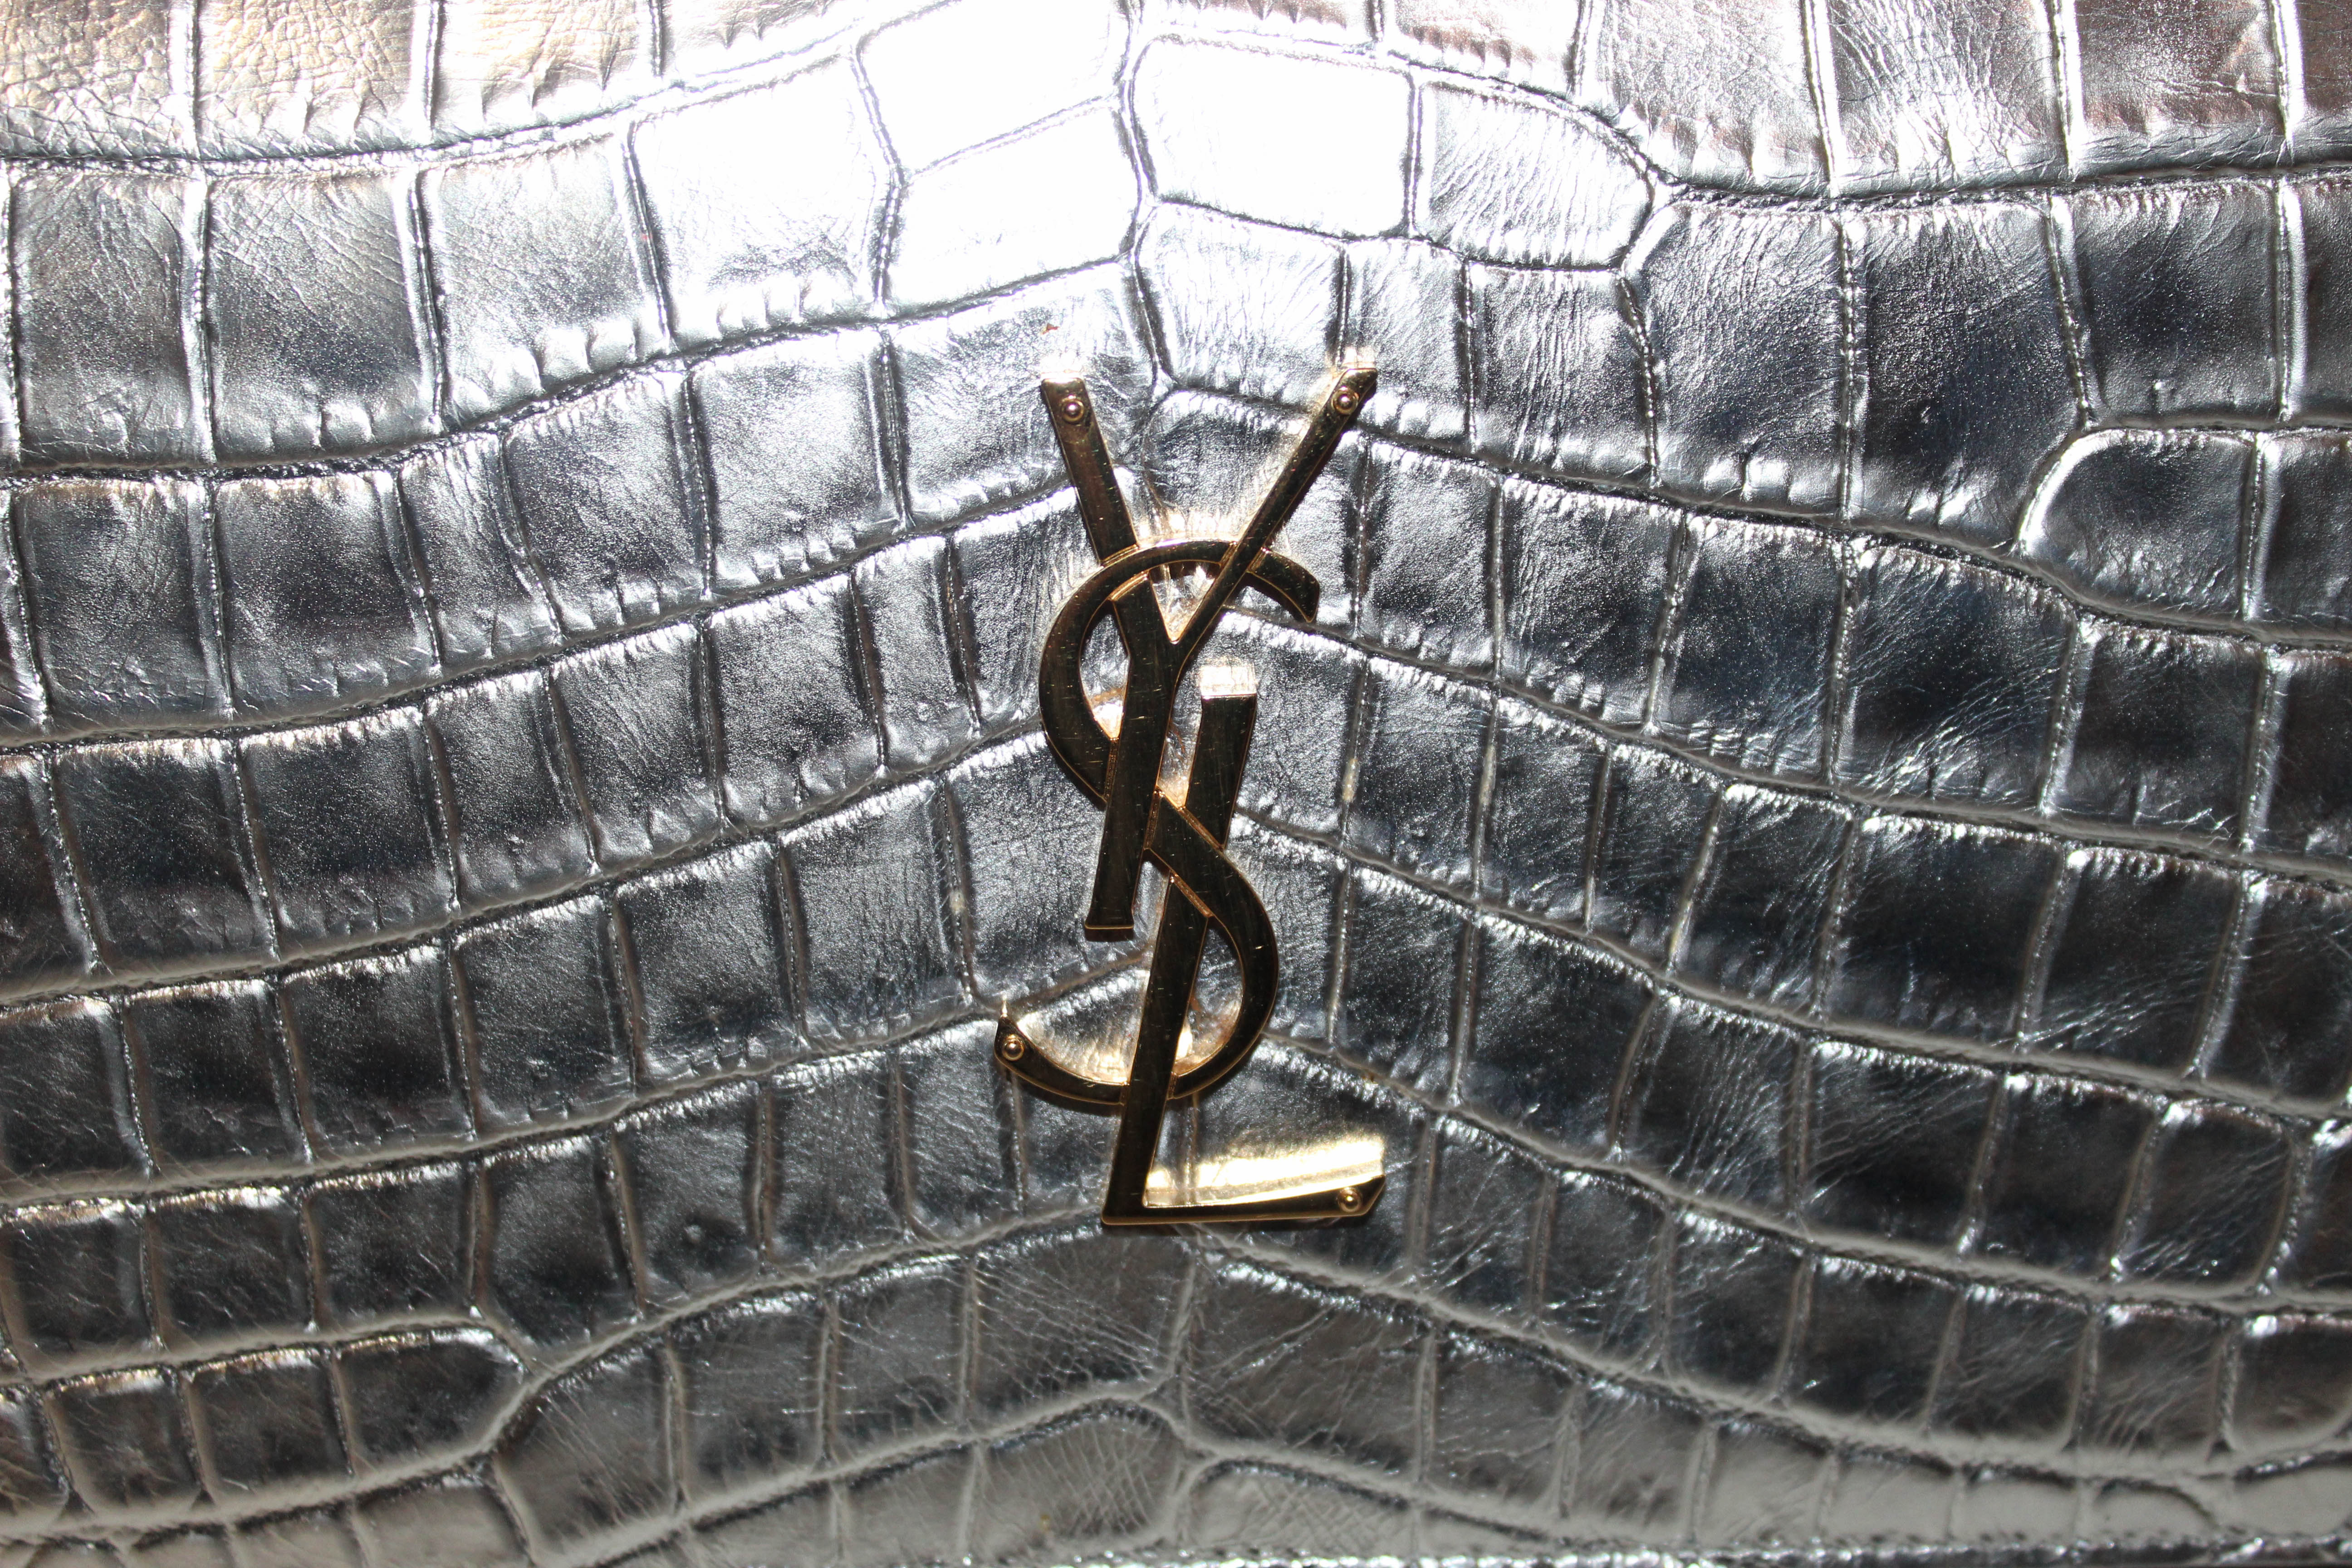 Authentic Yves Saint Laurent YSL Shiny Silver Crocodile Embossed Wallet On Chain/Clutch